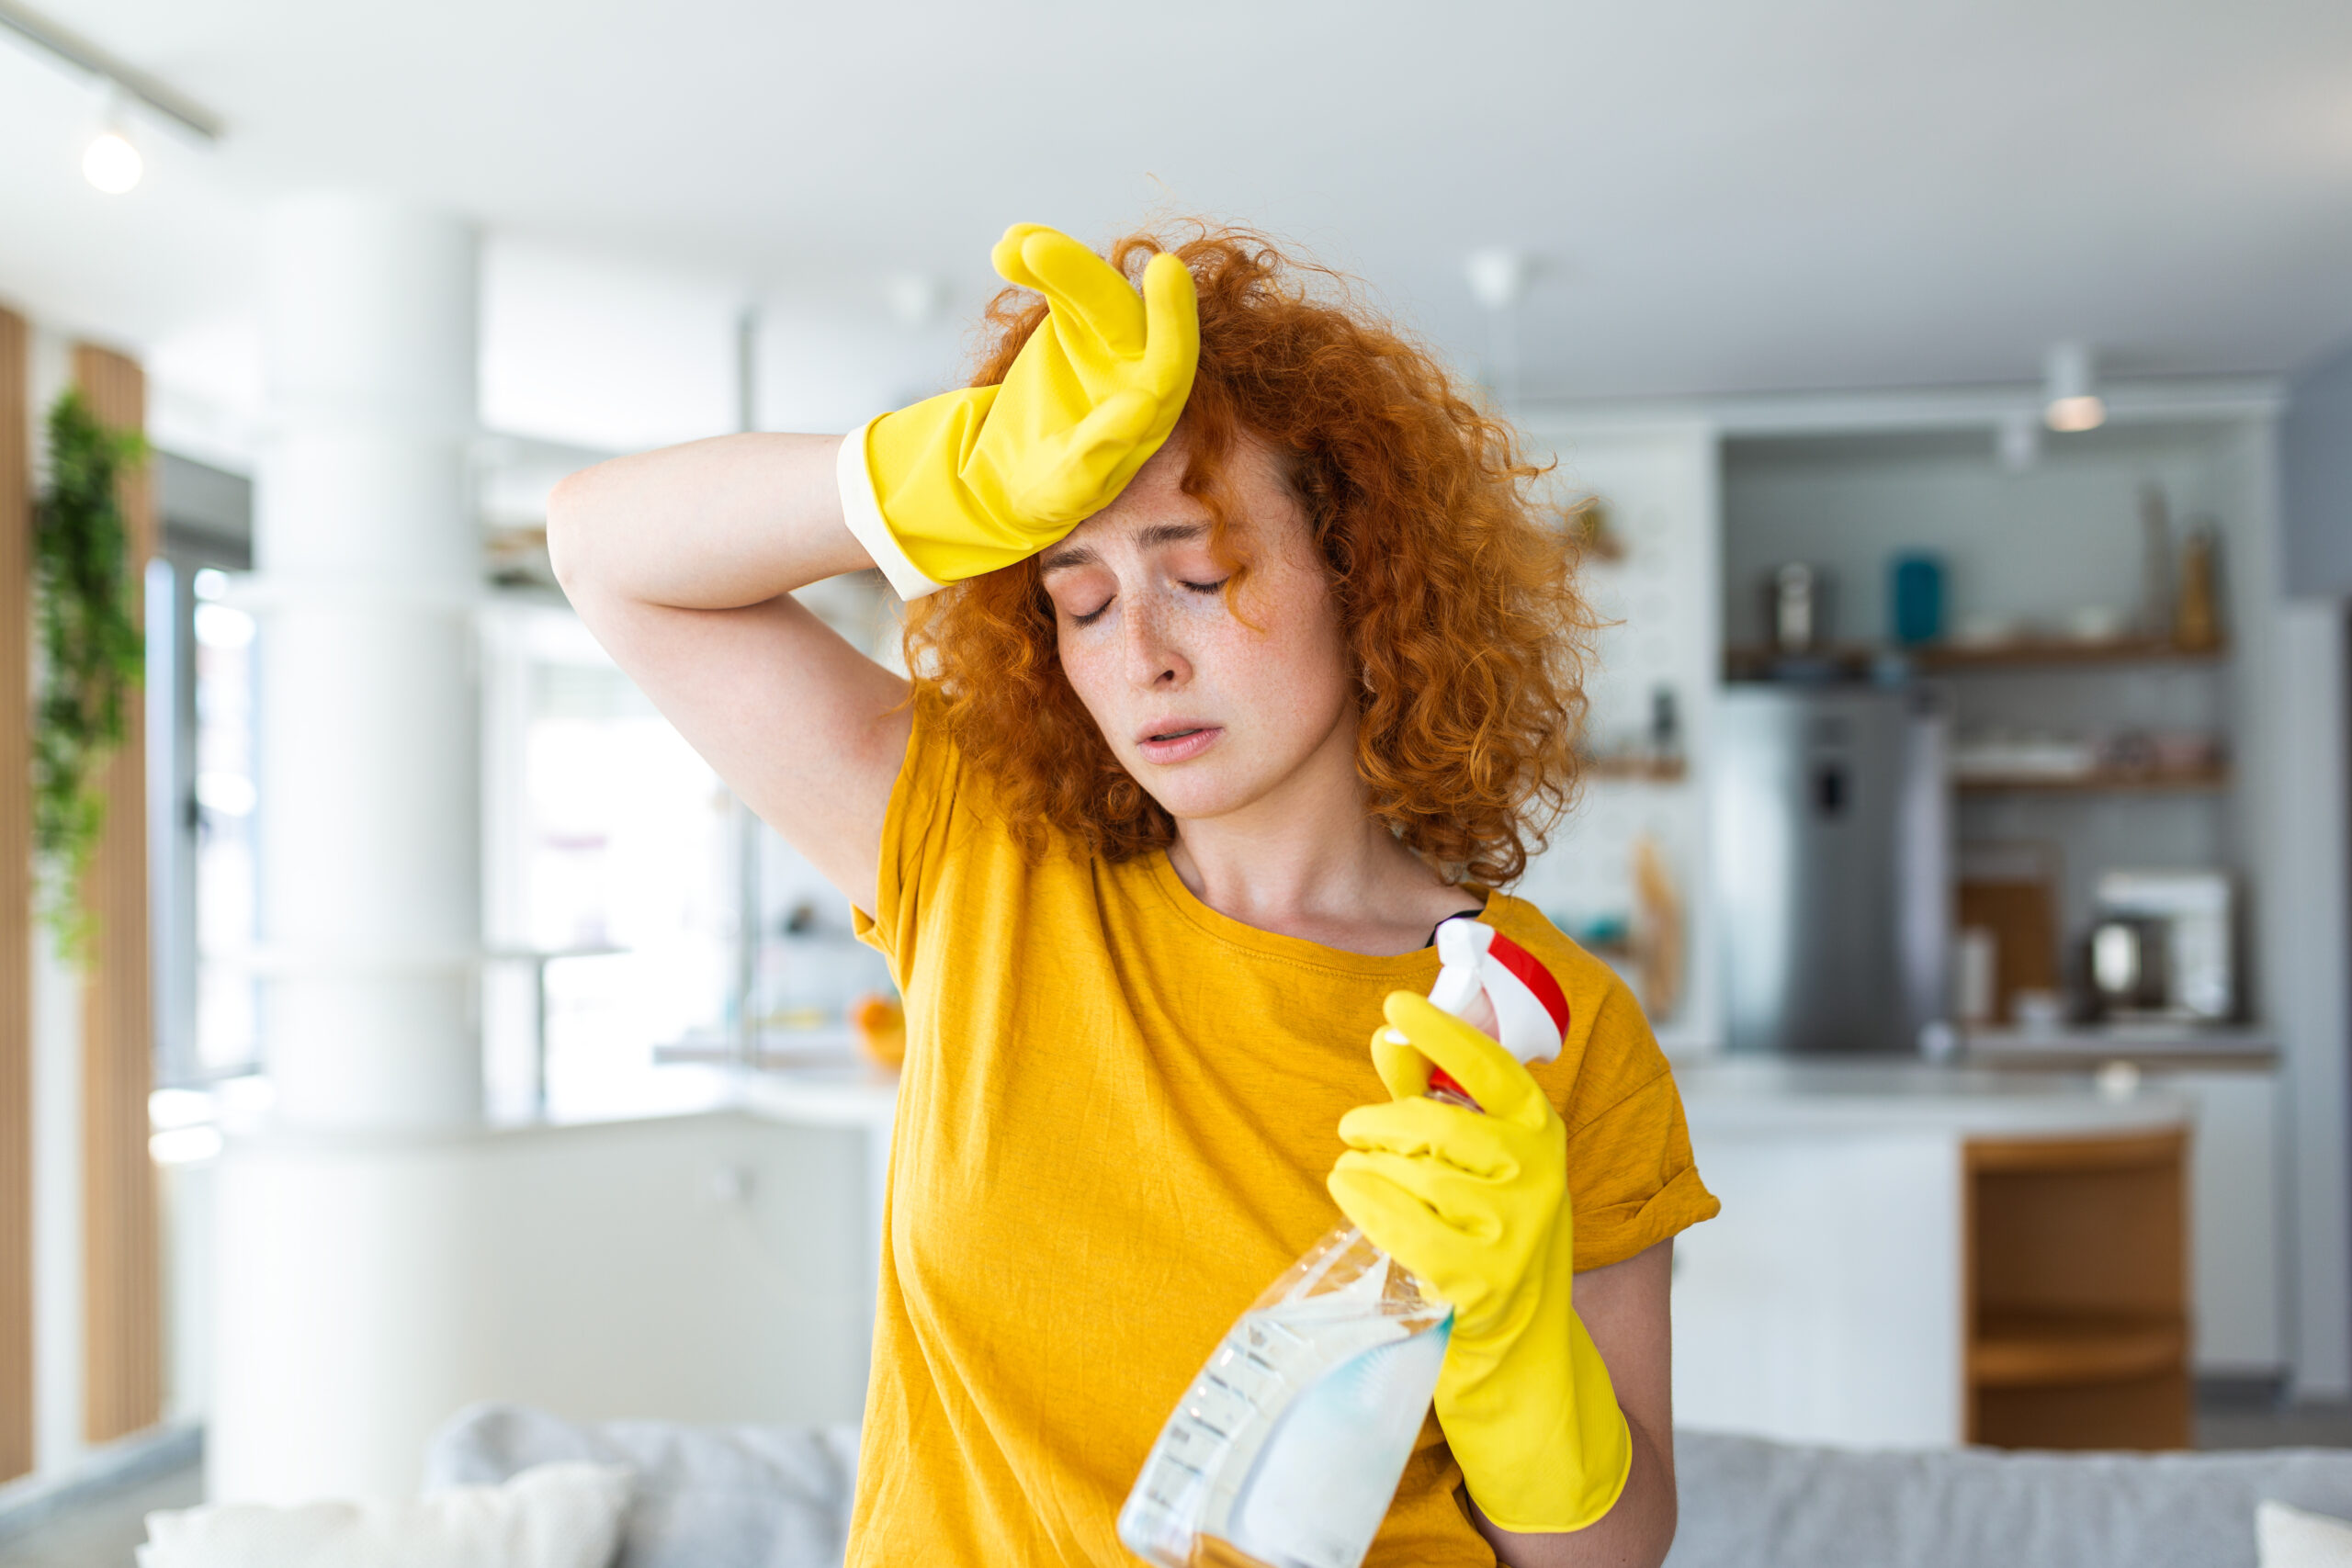 Portrait of young tired woman with rubber gloves resting after cleaning an apartment. Home, housekeeping concept.